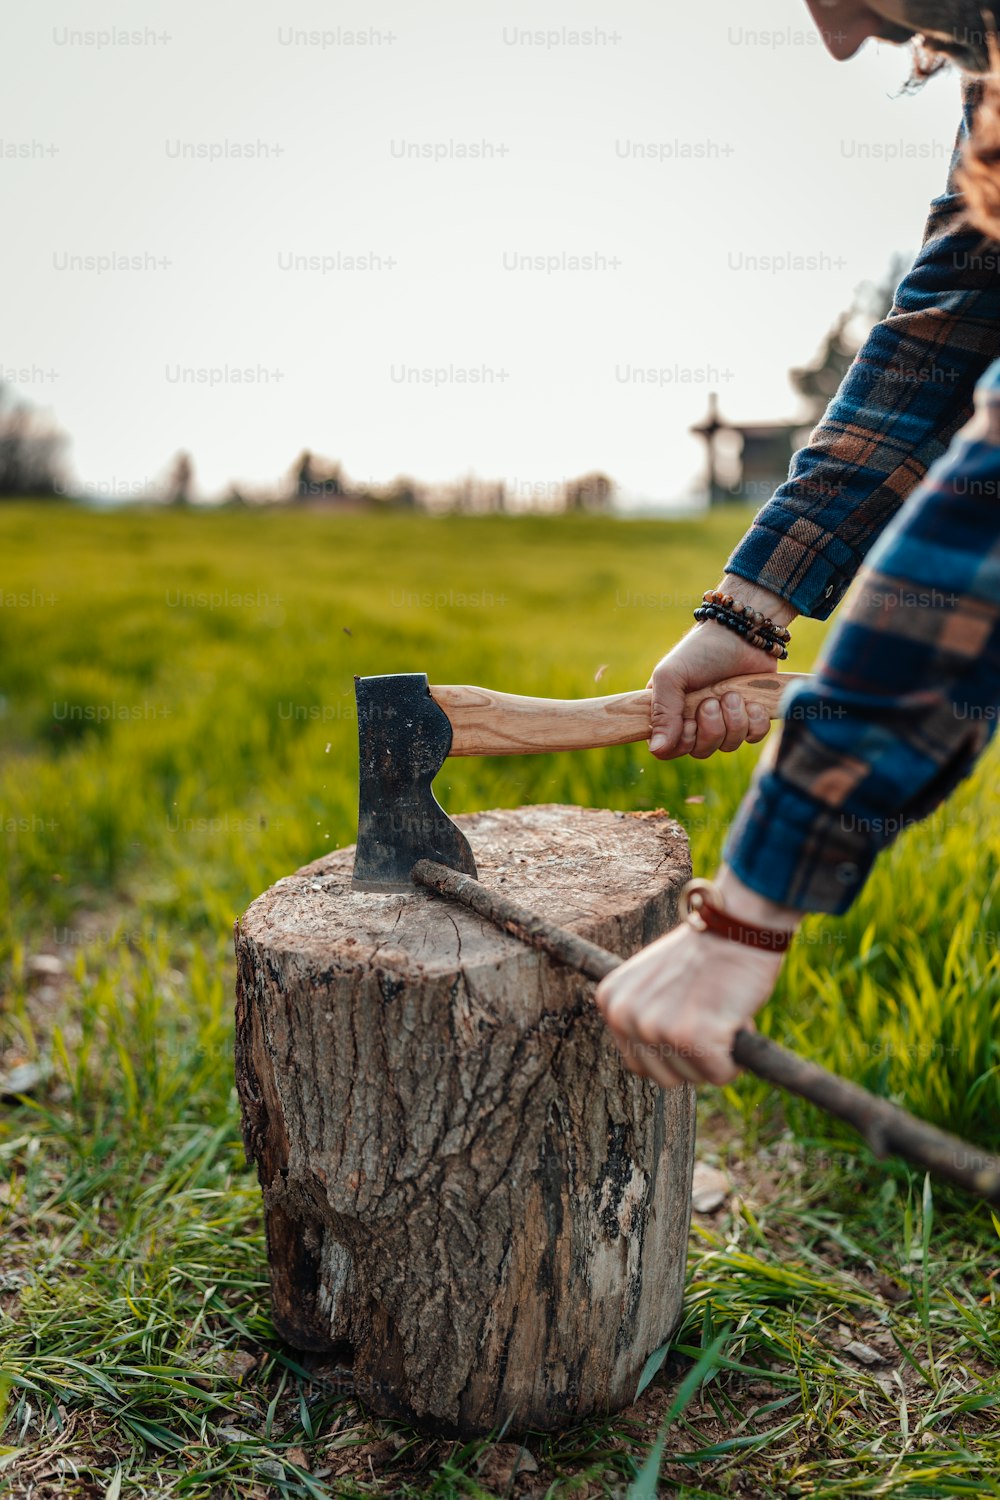 a woman is holding a hammer over a tree stump